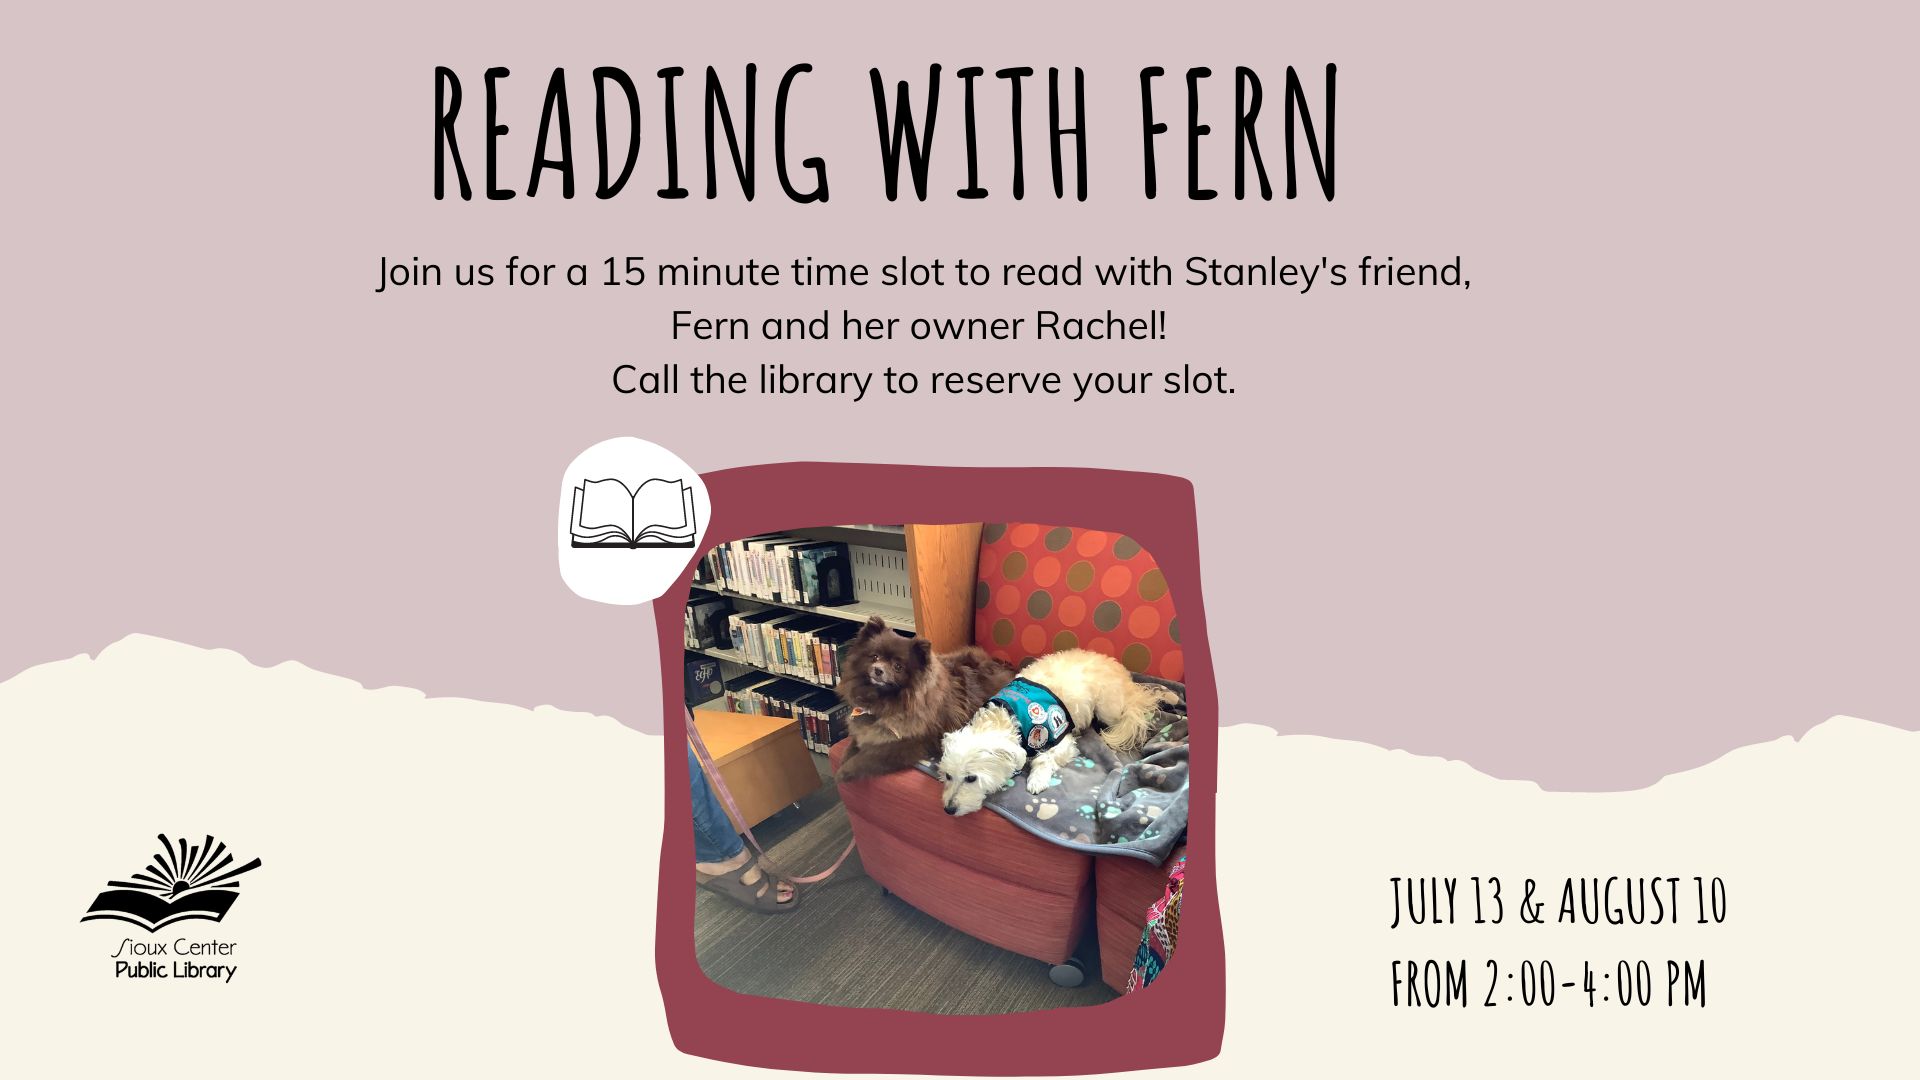 Reading with Fern